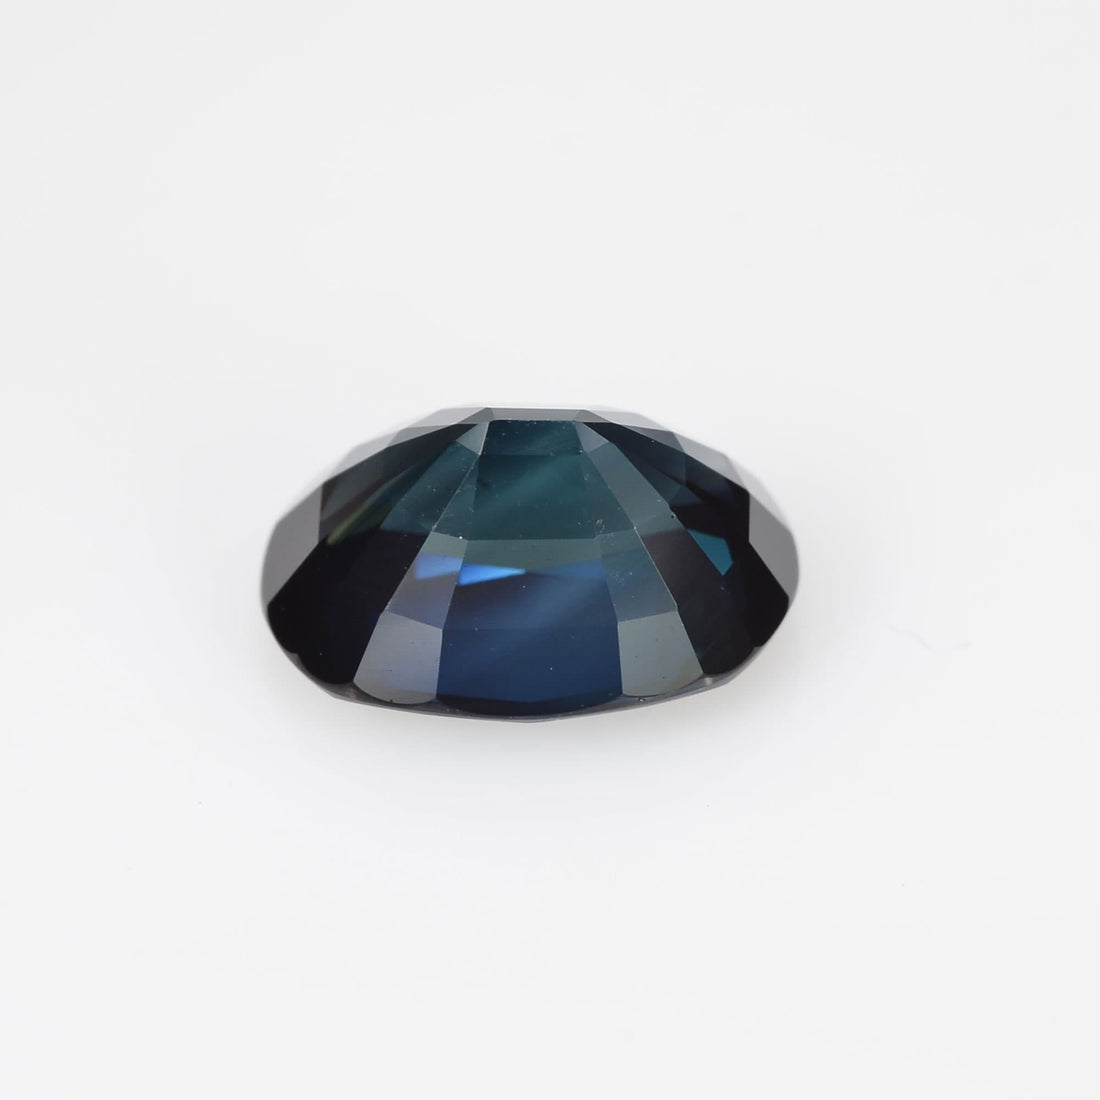 4.20 cts Natural Teal Blue Green Sapphire Loose Gemstone Oval Cut